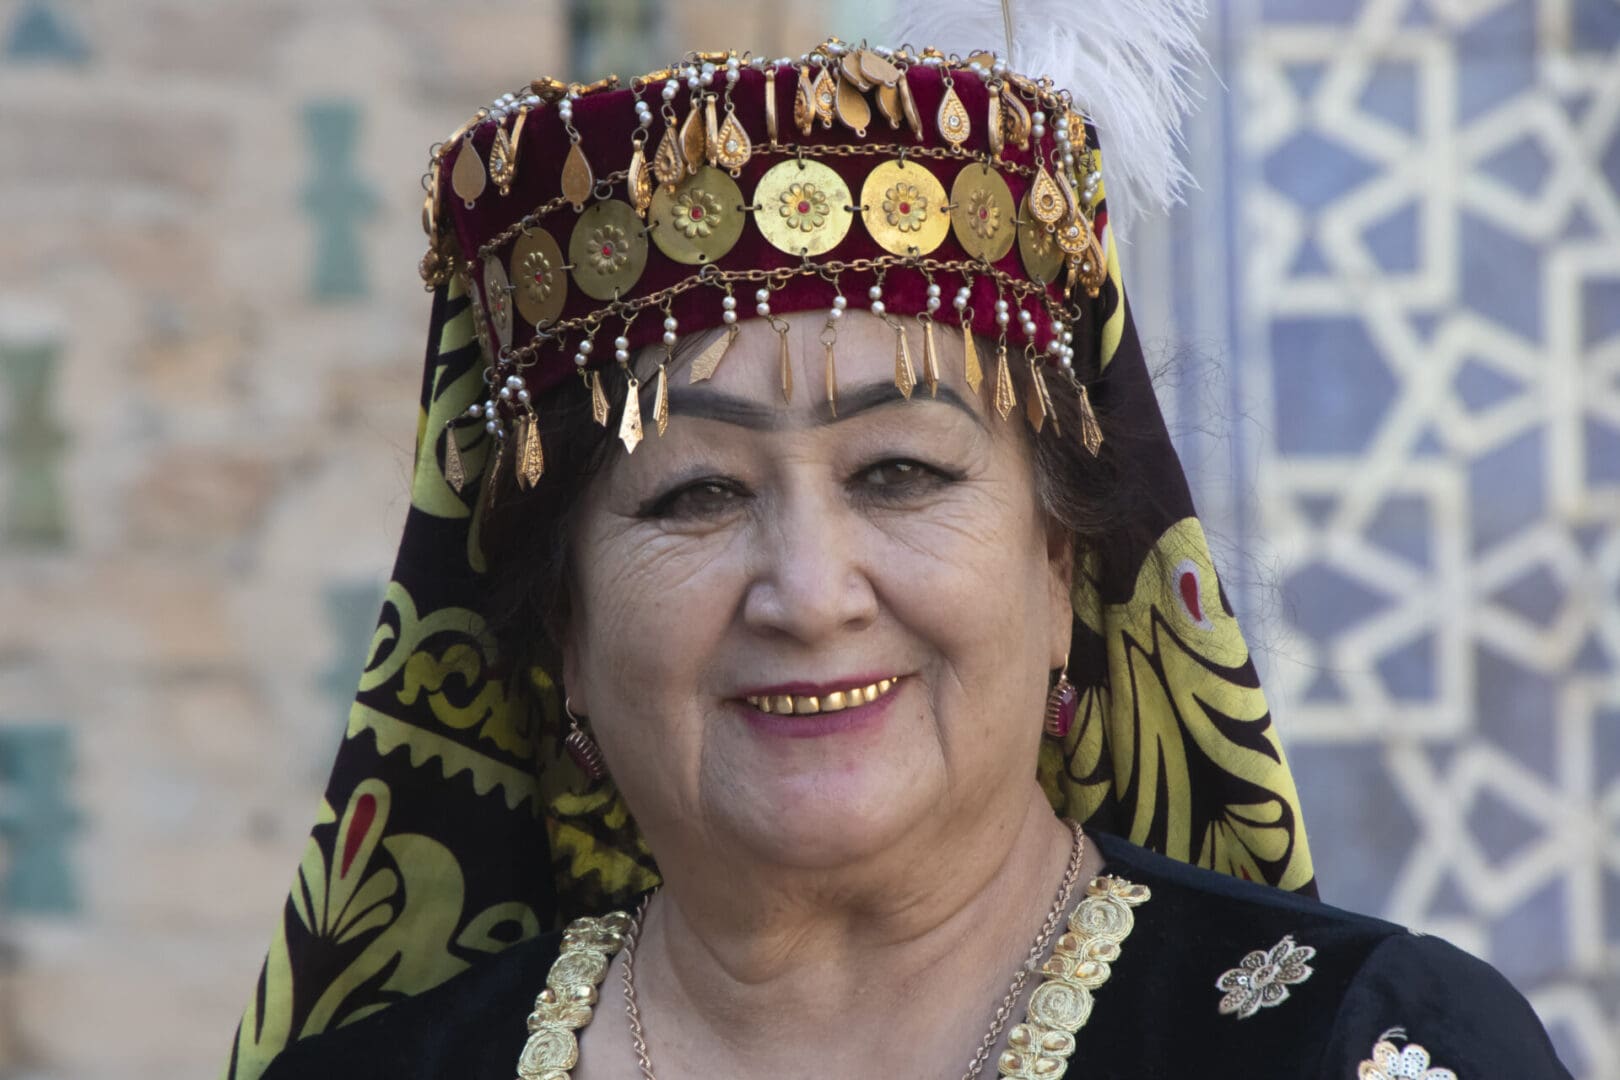 A woman in a traditional costume smiles for the camera.